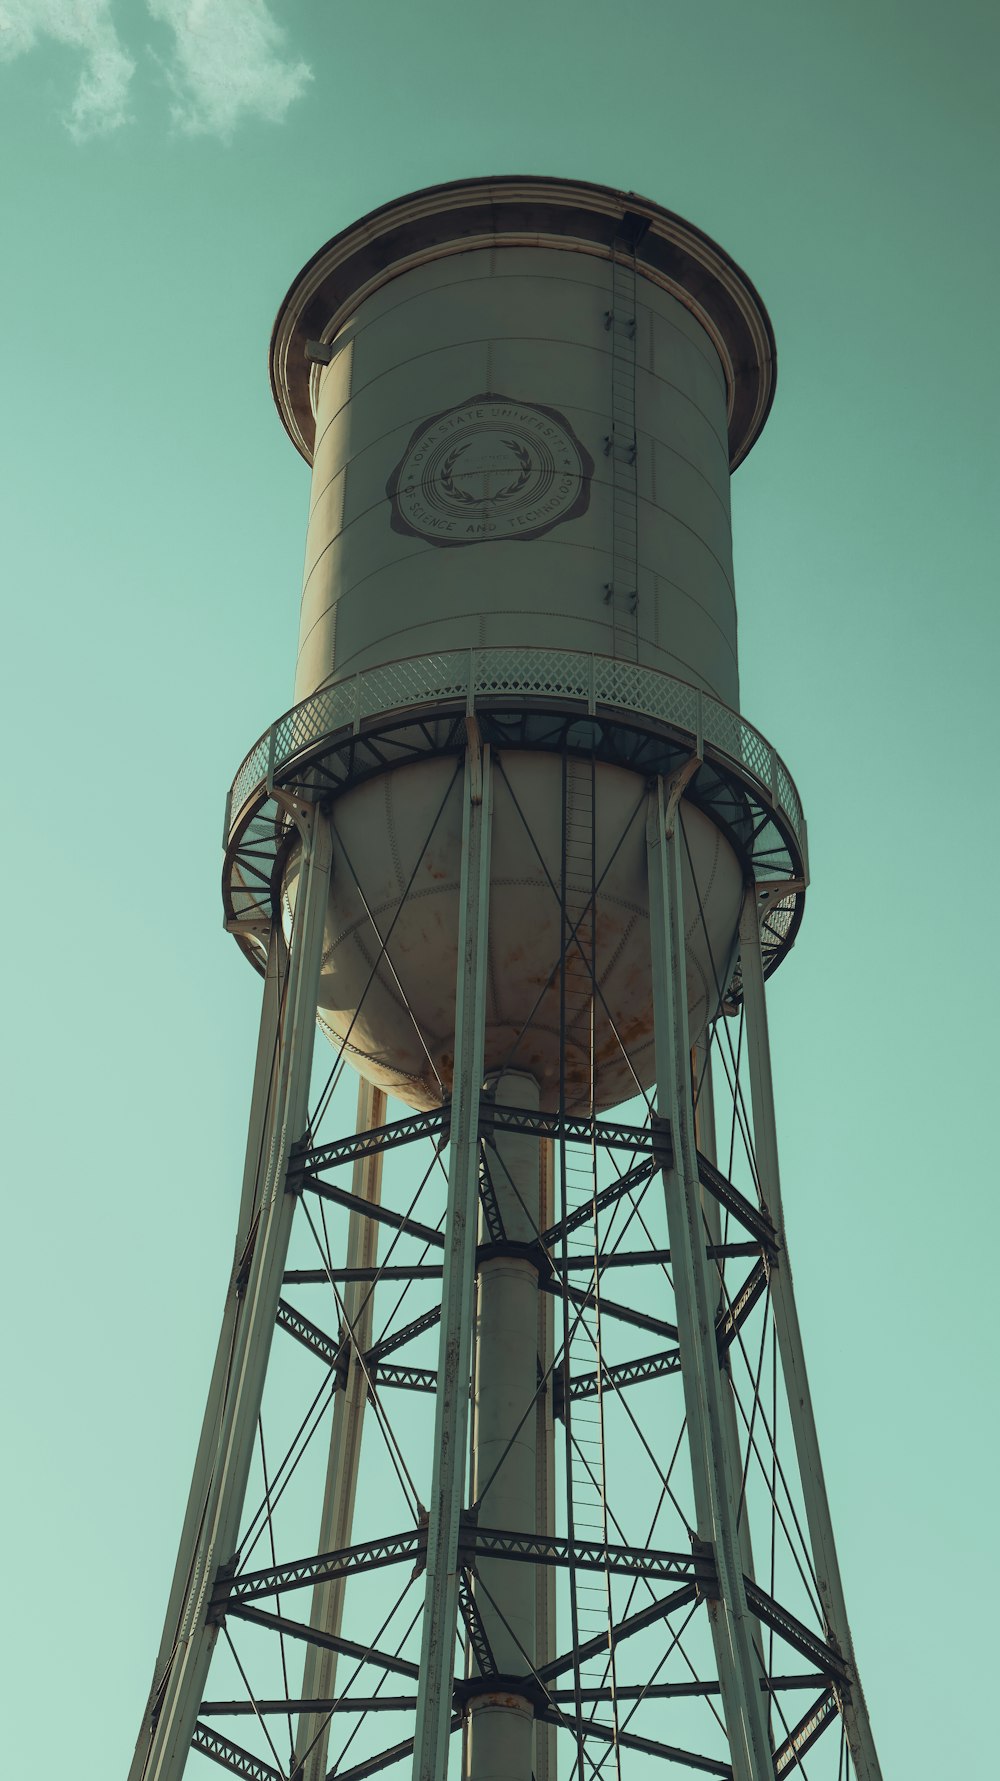 a tall water tower with a sky background